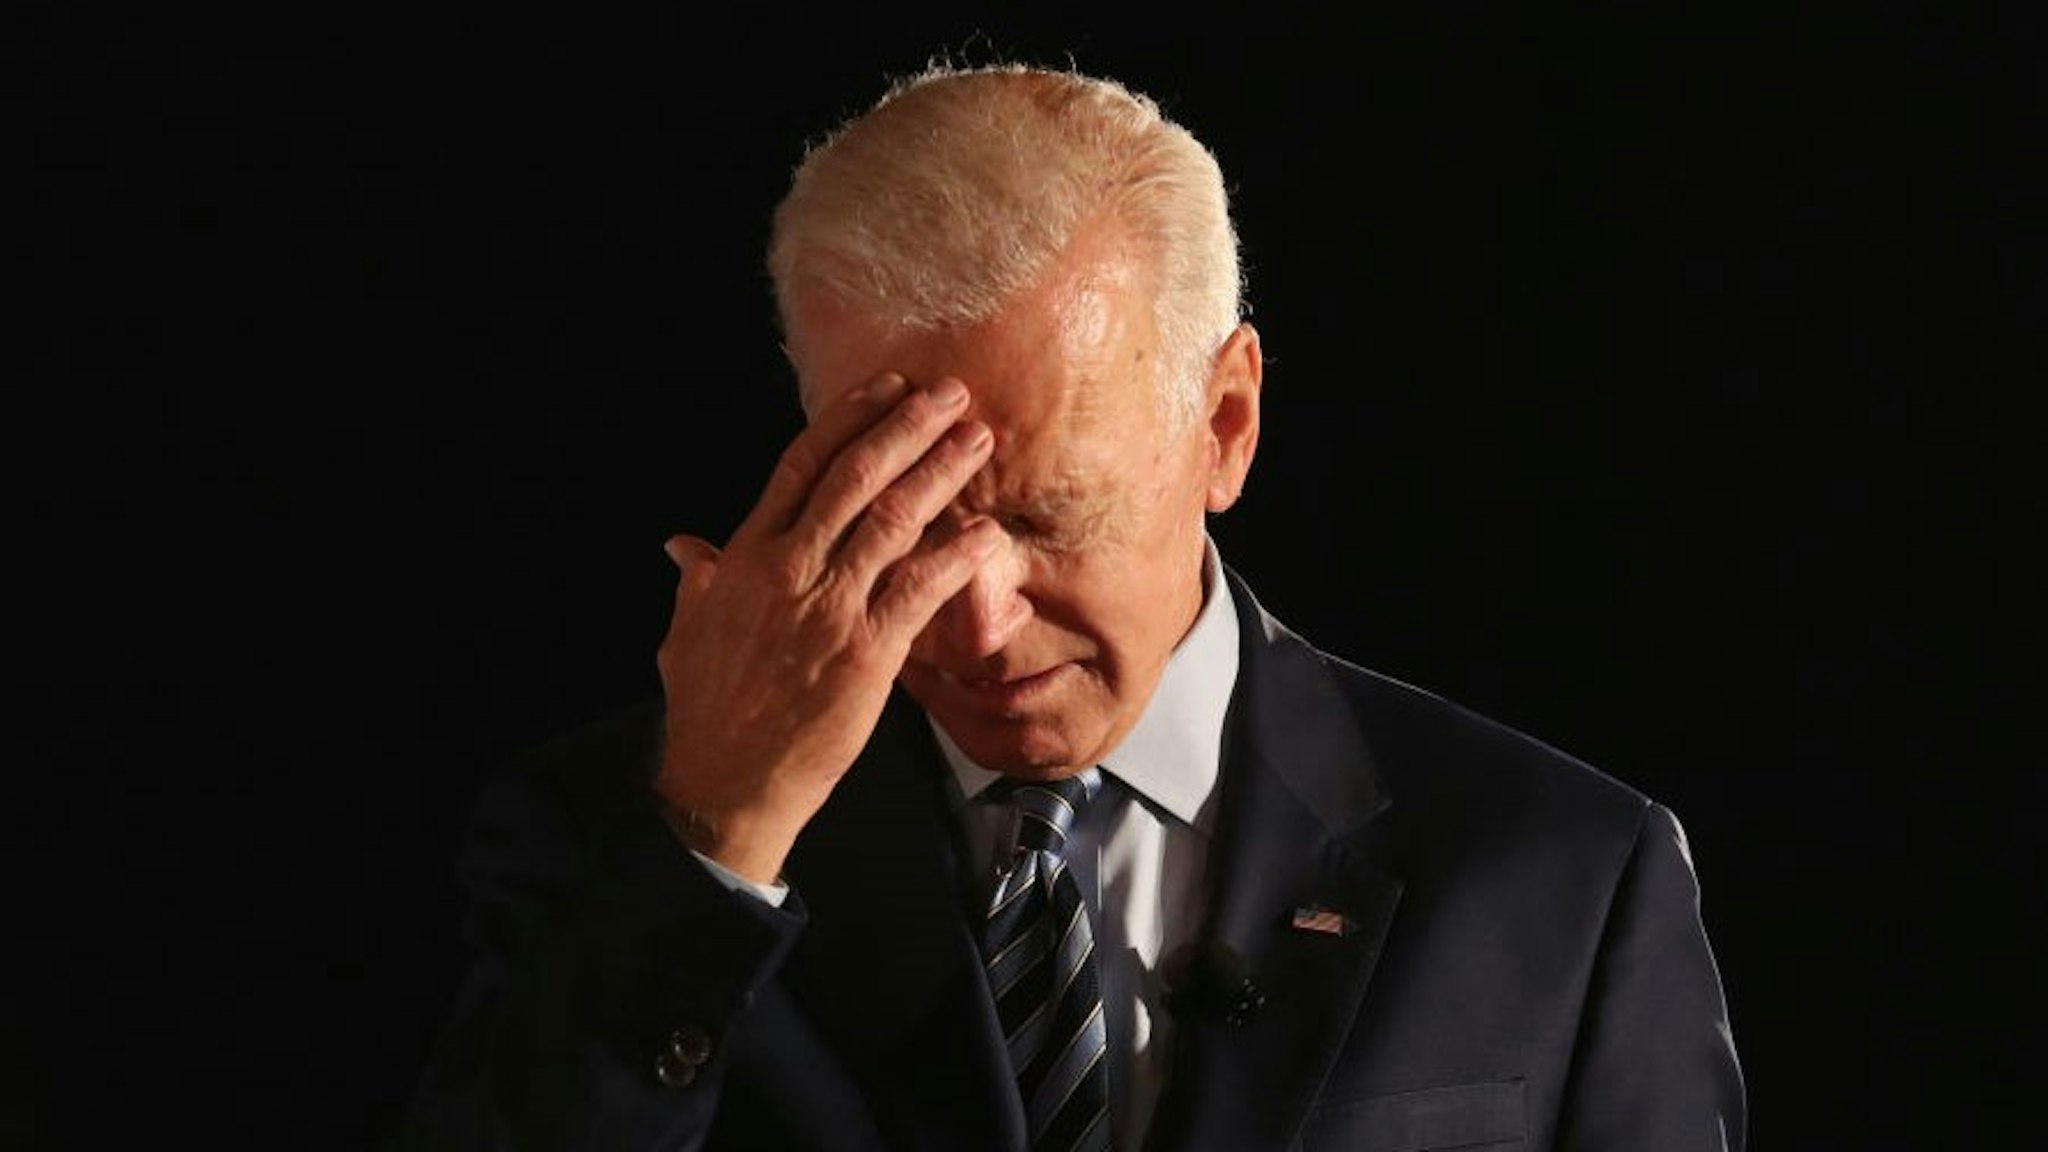 DES MOINES, IOWA - JULY 15: Democratic presidential candidate former U.S. Vice President Joe Biden pauses as he speaks during the AARP and The Des Moines Register Iowa Presidential Candidate Forum at Drake University on July 15, 2019 in Des Moines, Iowa. Twenty Democratic presidential candidates are participating in the forums that will feature four candidate per forum, to be held in cities across Iowa over five days. (Photo by